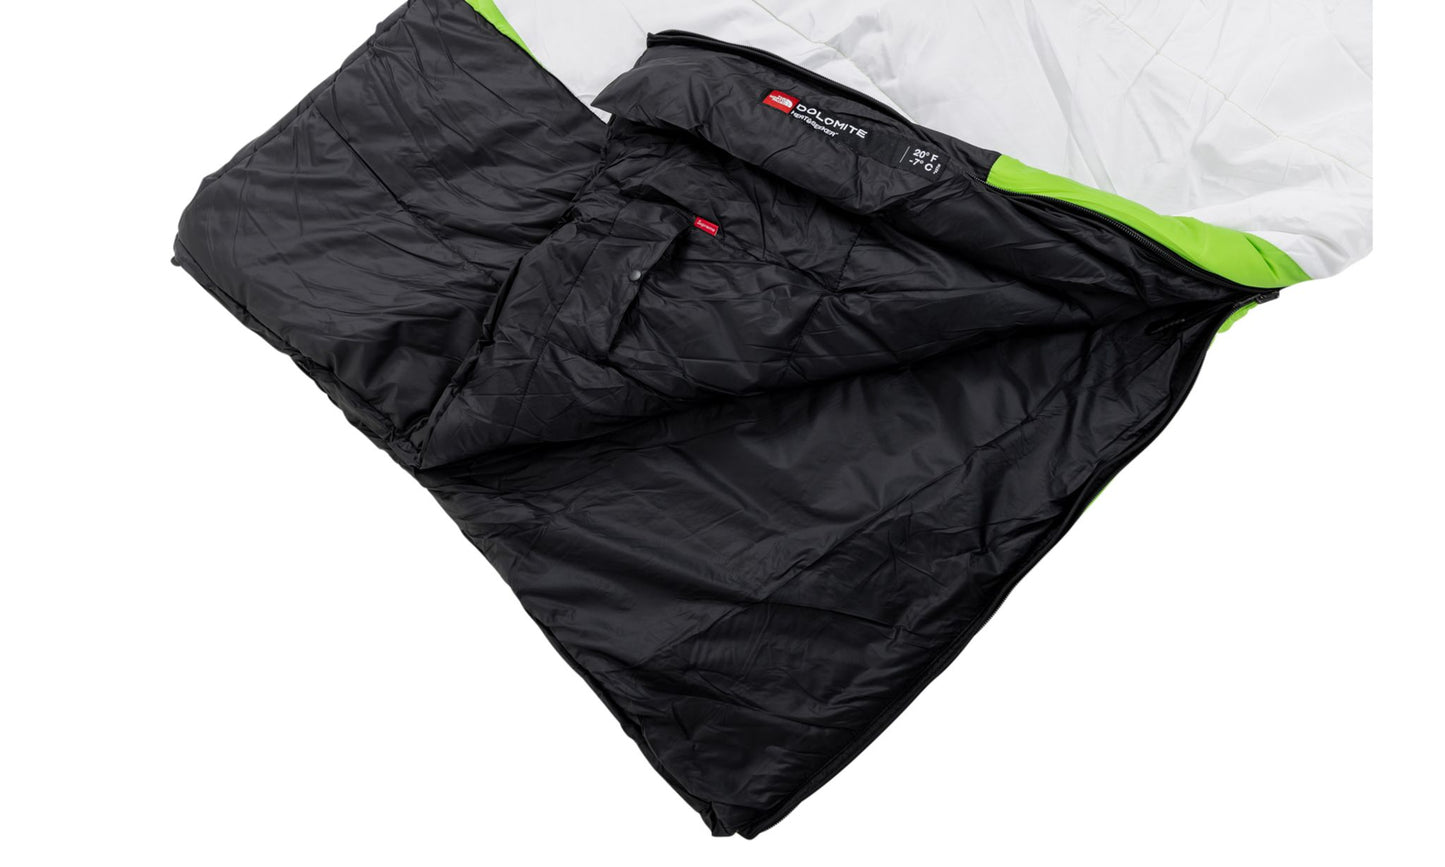 Supreme The North Face S Logo Dolomite 3S-20 Sleeping Bag (FW20) - Lime